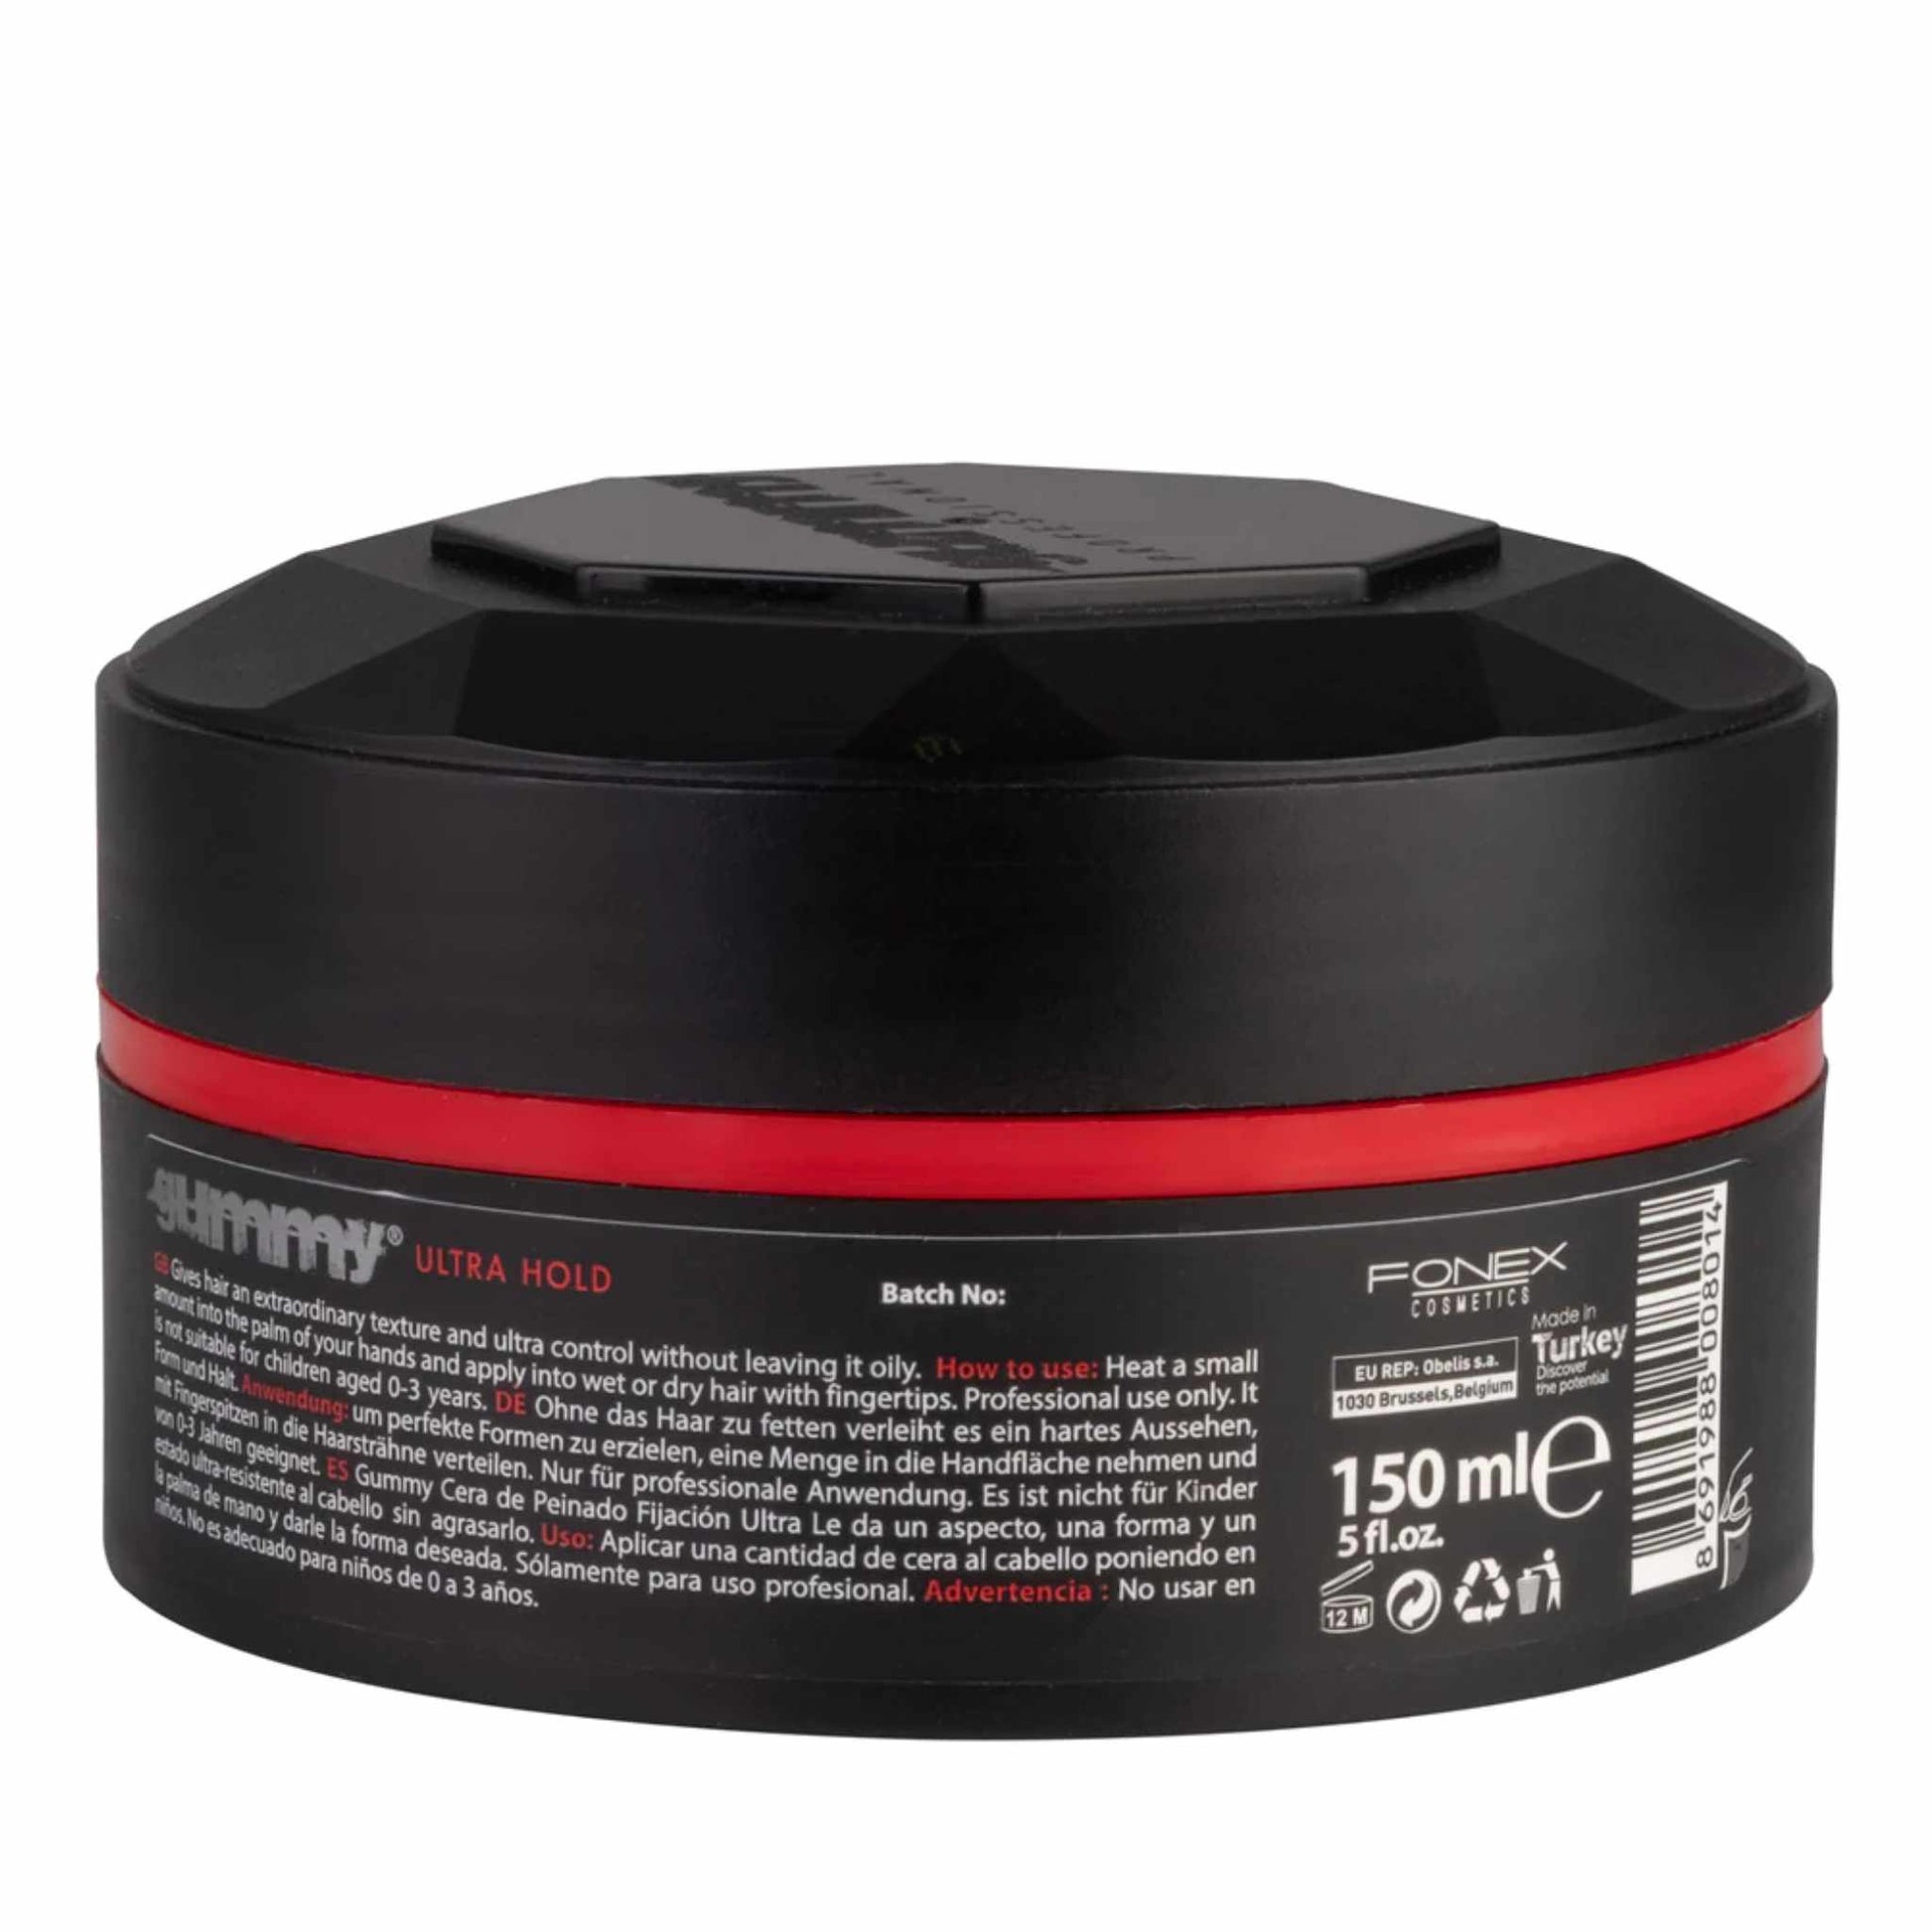 Gummy Styling Wax Ultra Hold Information Label 150 ml